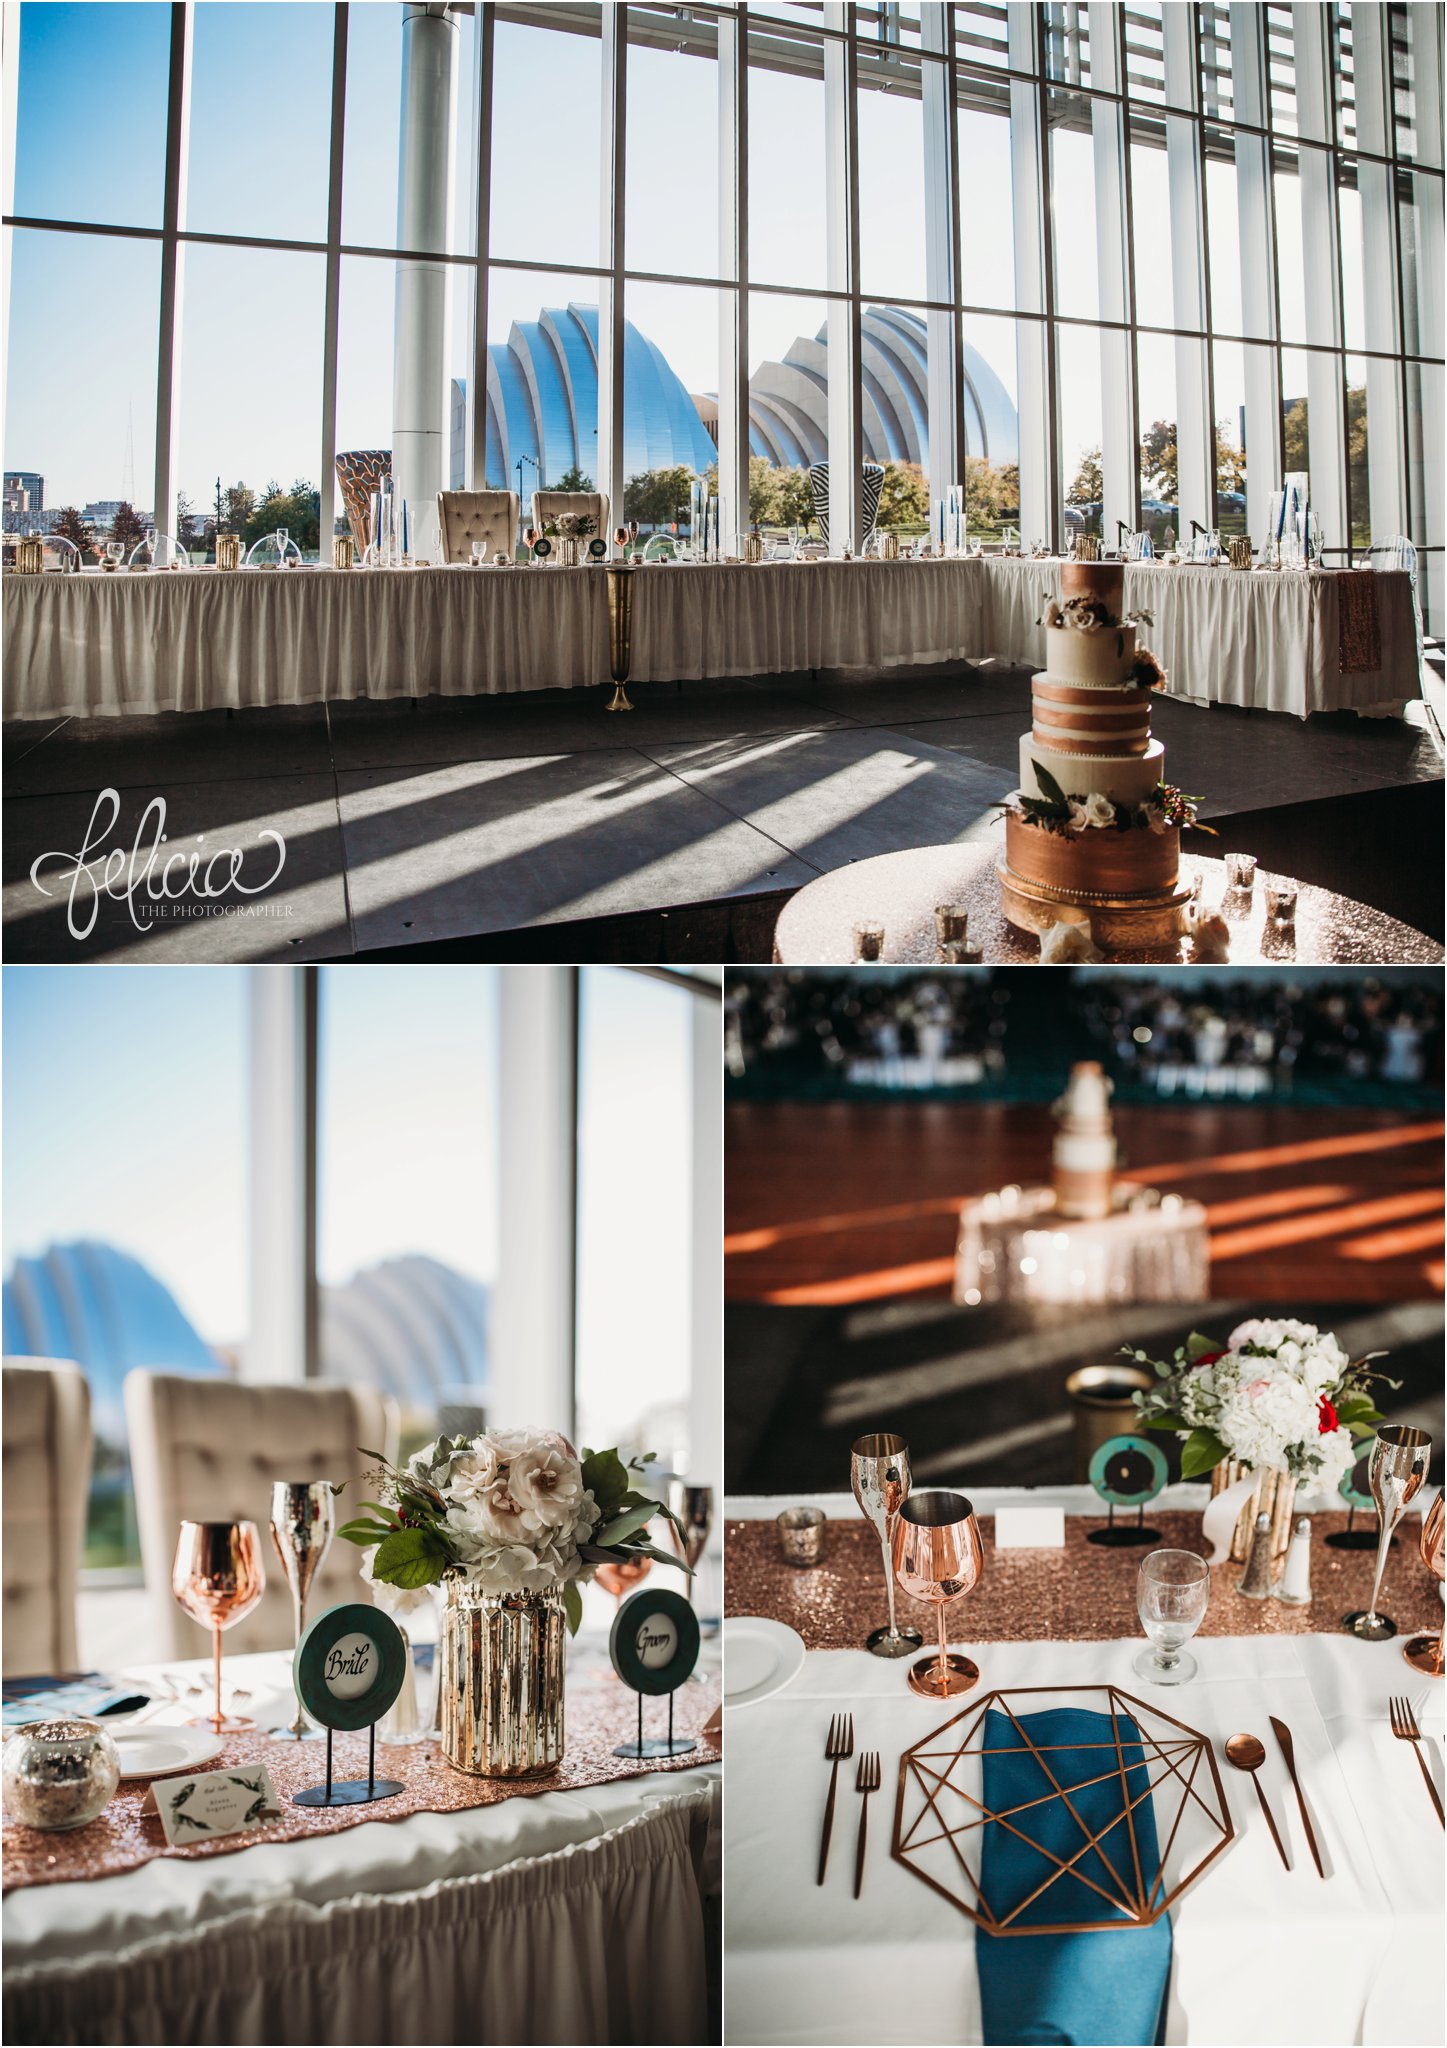 images by feliciathephotographer.com | wedding photographer | downtown kansas city | the grand ballroom kc convention center | kauffman | details | reception venue | rose gold | light pink | table setting | sequins | cake | floral garnish | leather chairs | romantic | bohemian | glamorous | 